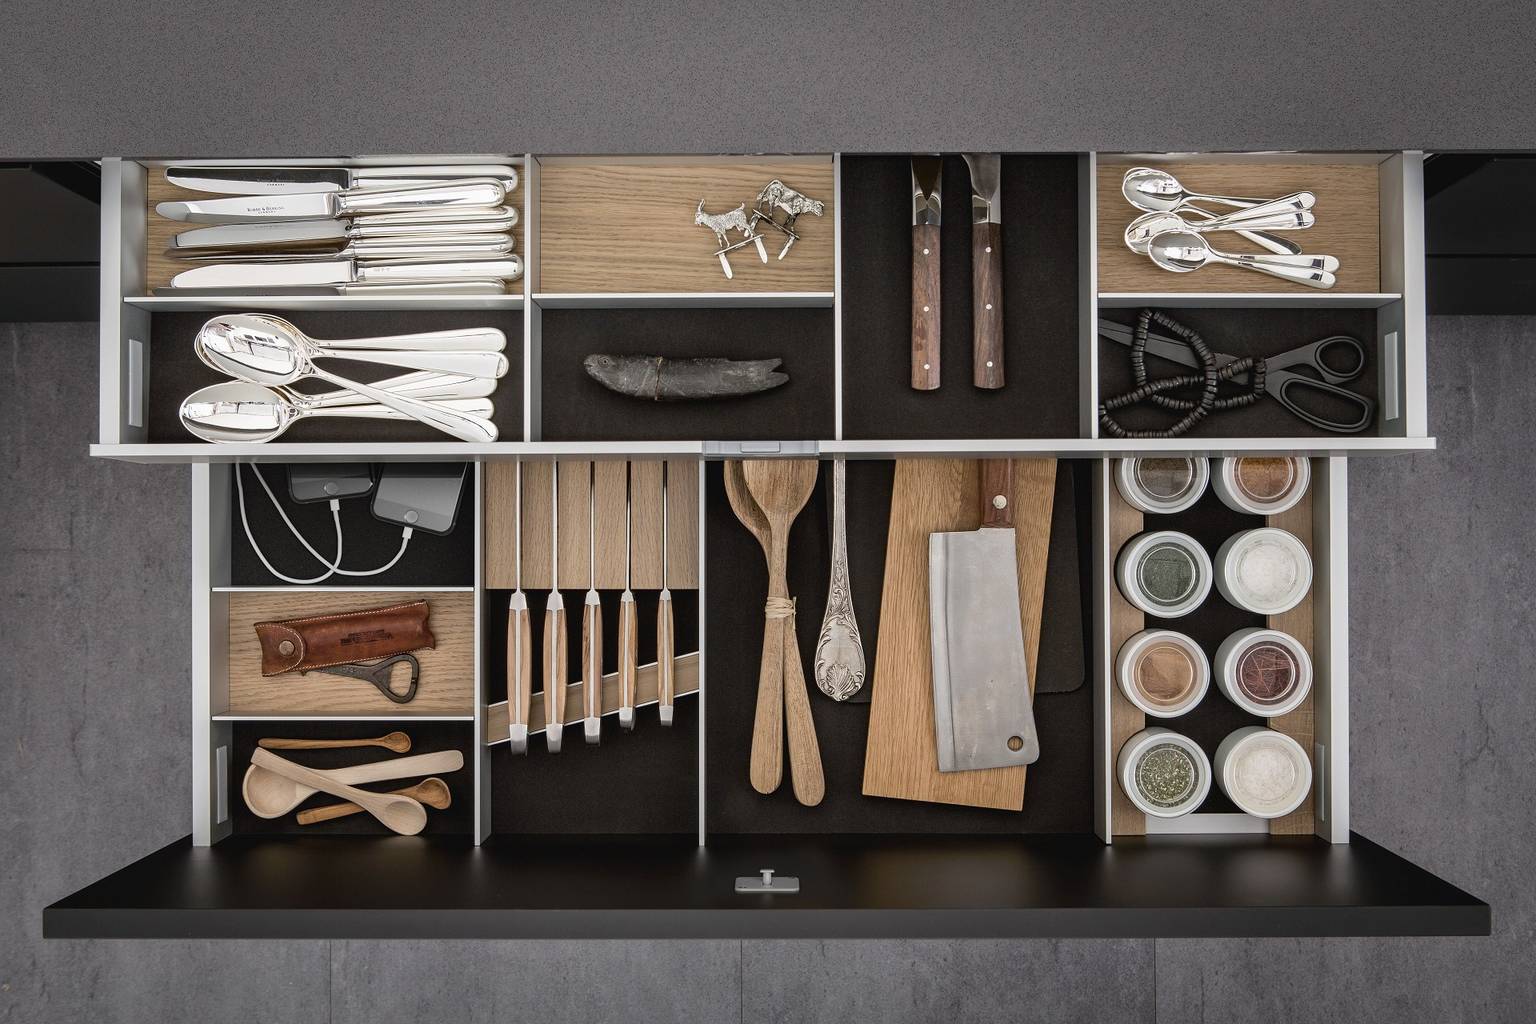 Cutlery inserts, porcelain jars, knife block and USB charging station for iPhone in SieMatic kitchen drawer